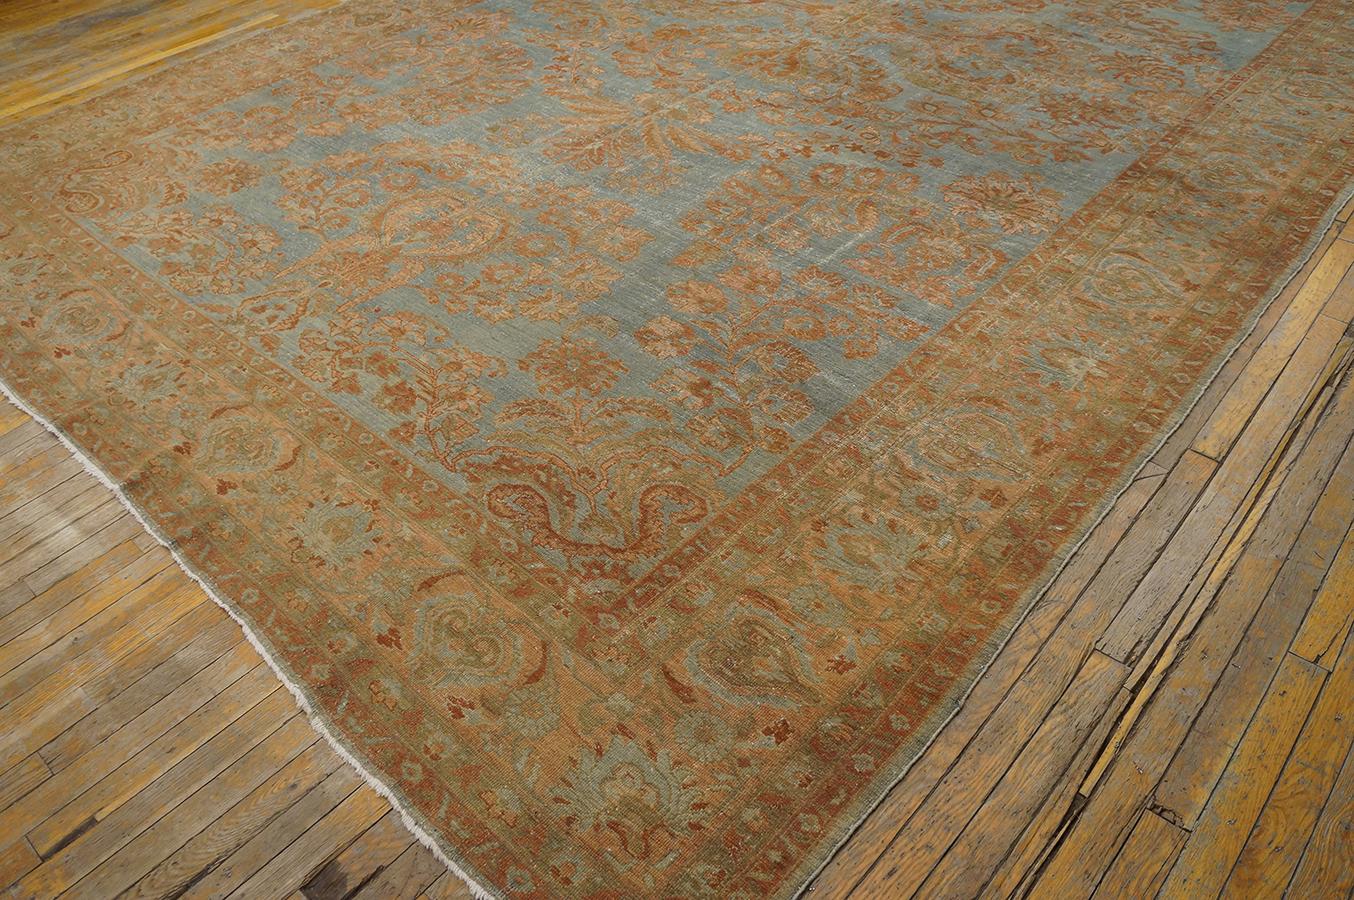 Early 20th Century 1920s Persian Malayer Carpet ( 10'6